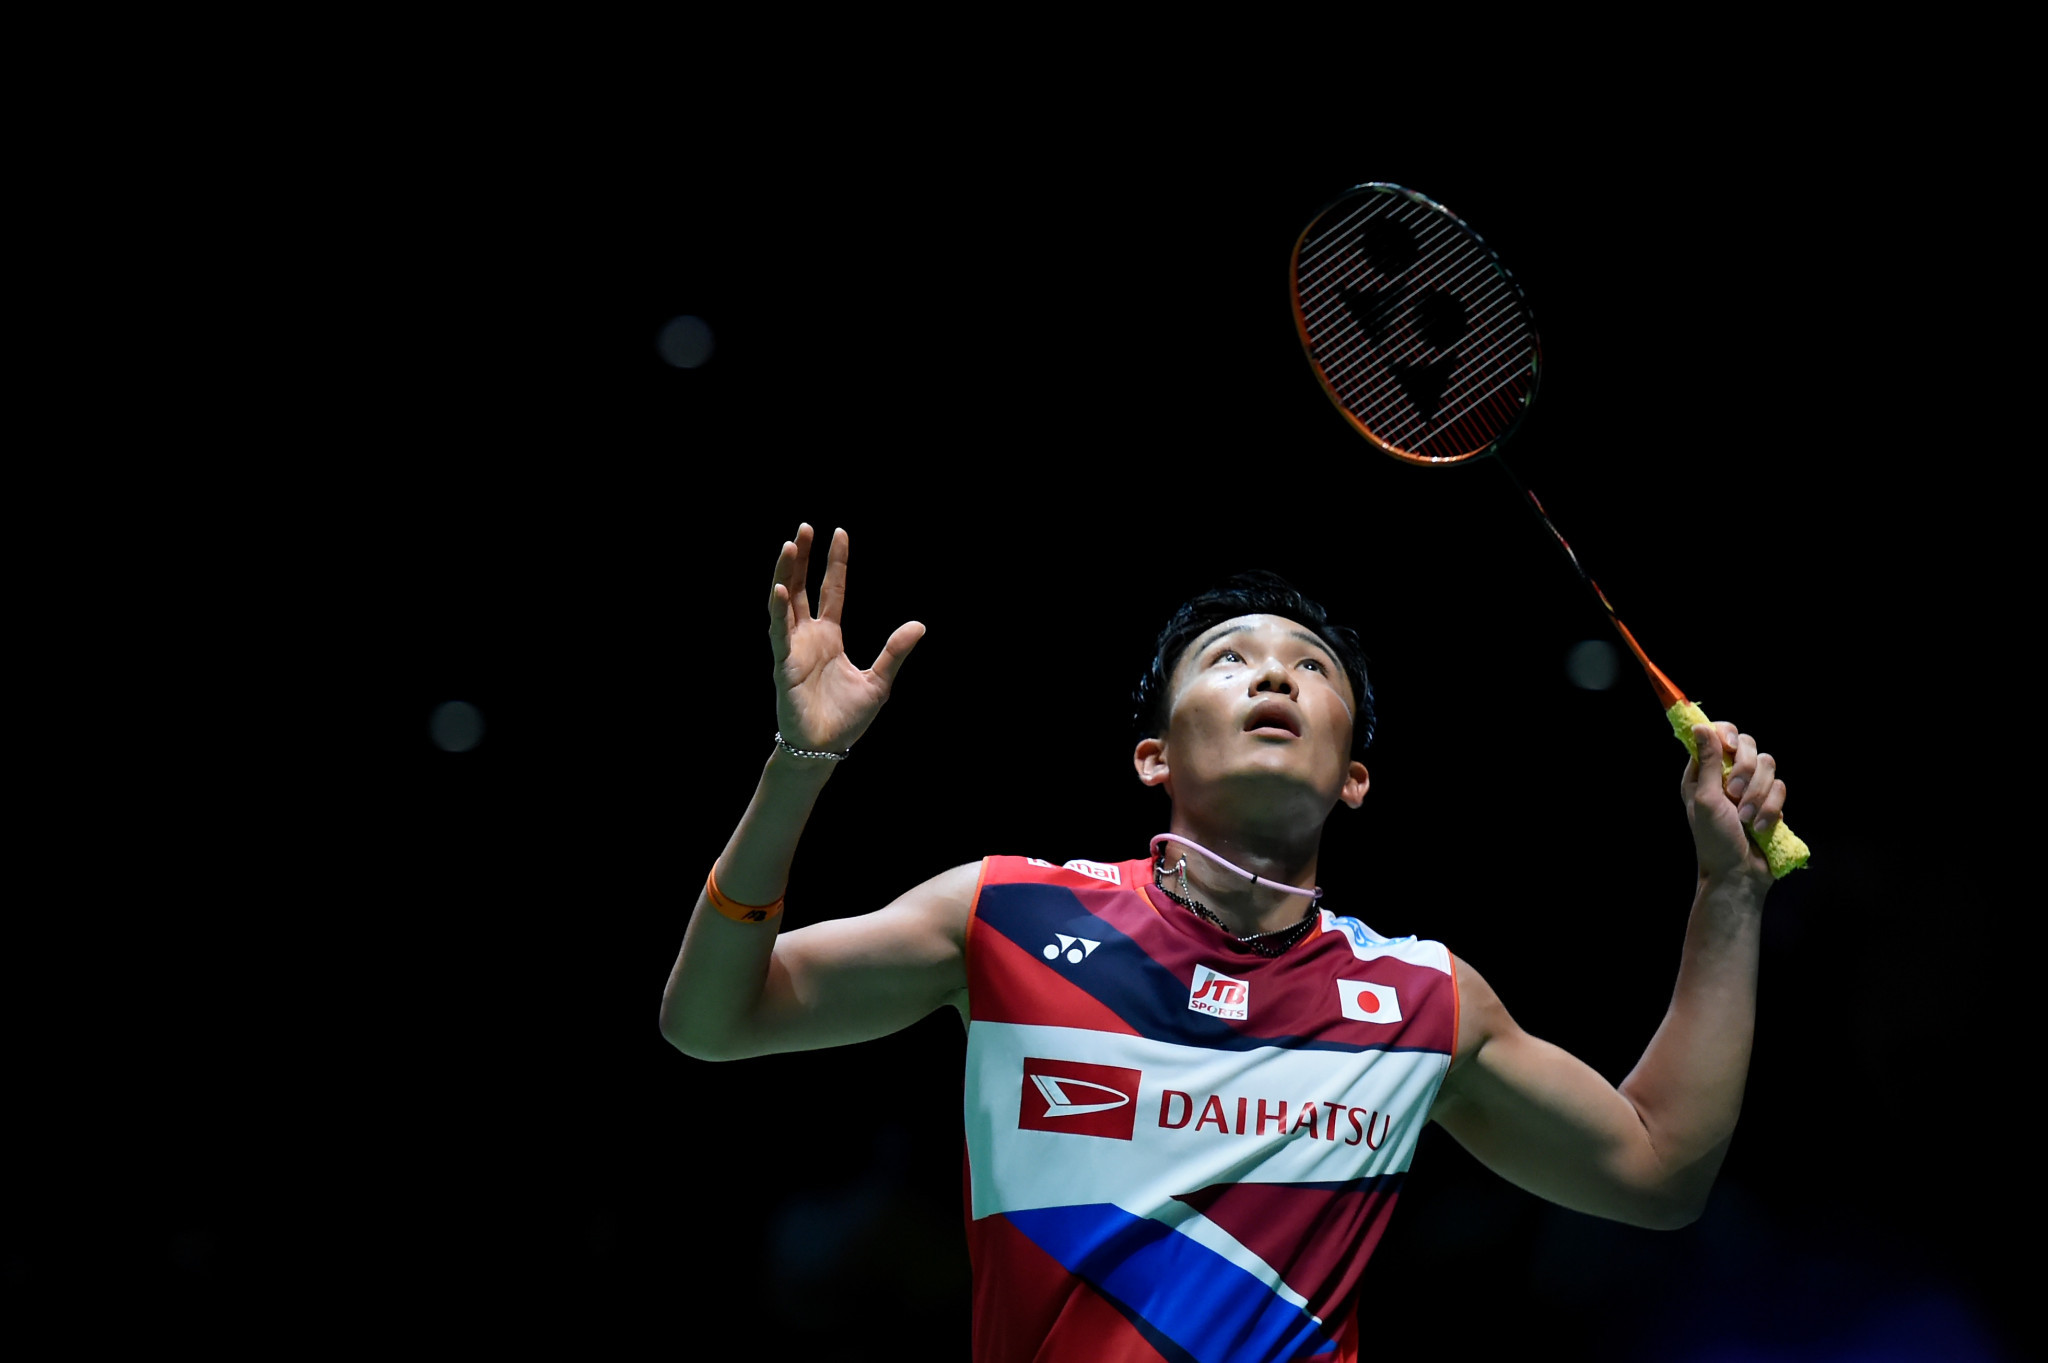 World's top ranked player Momota returns to competition